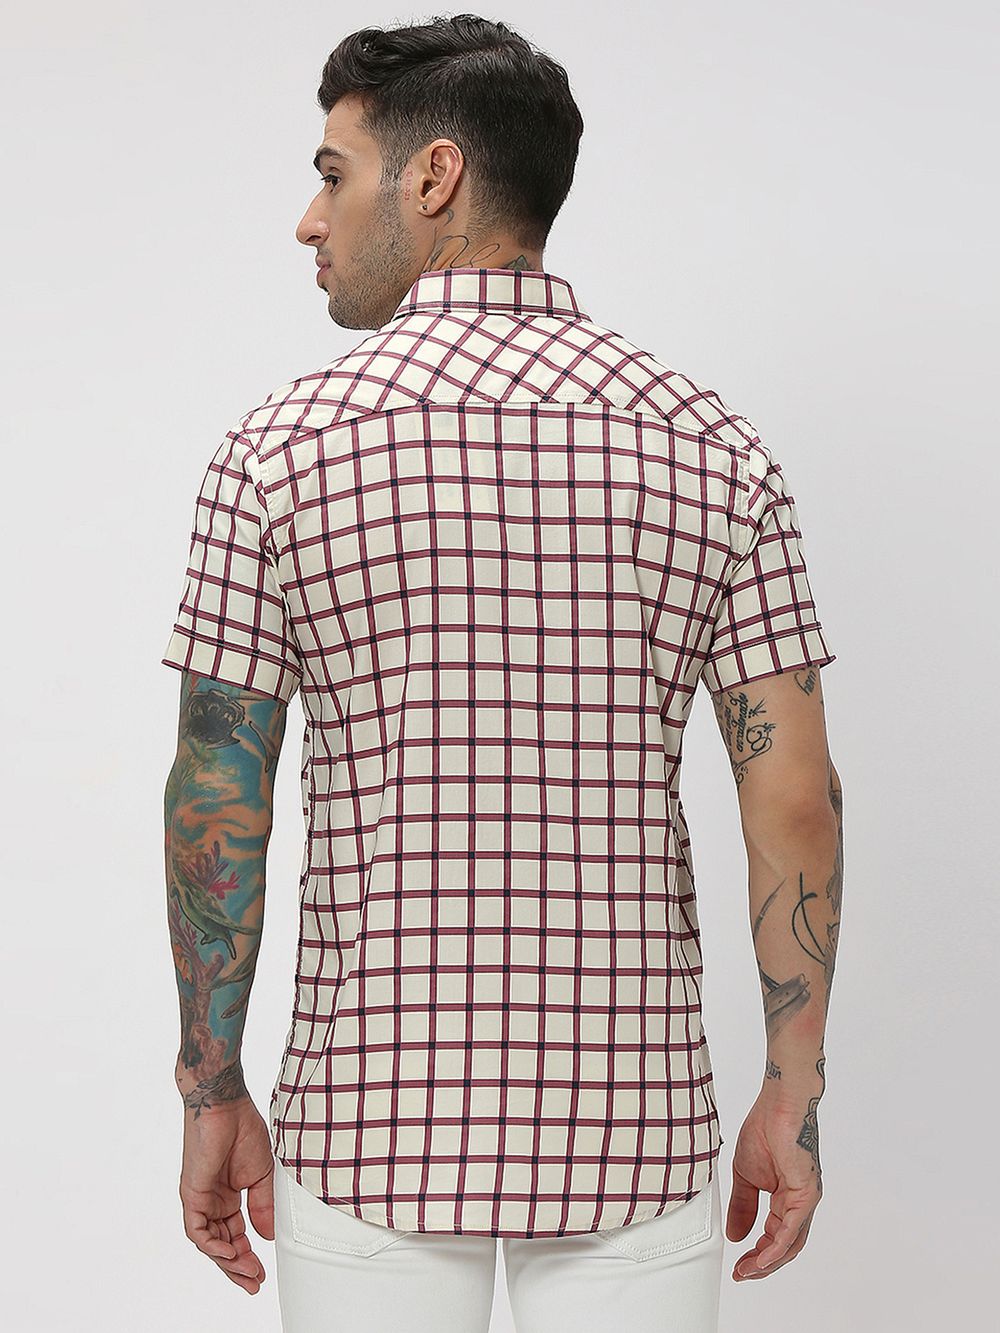 Off White & Pink Grid Check Slim Fit Casual Shirt